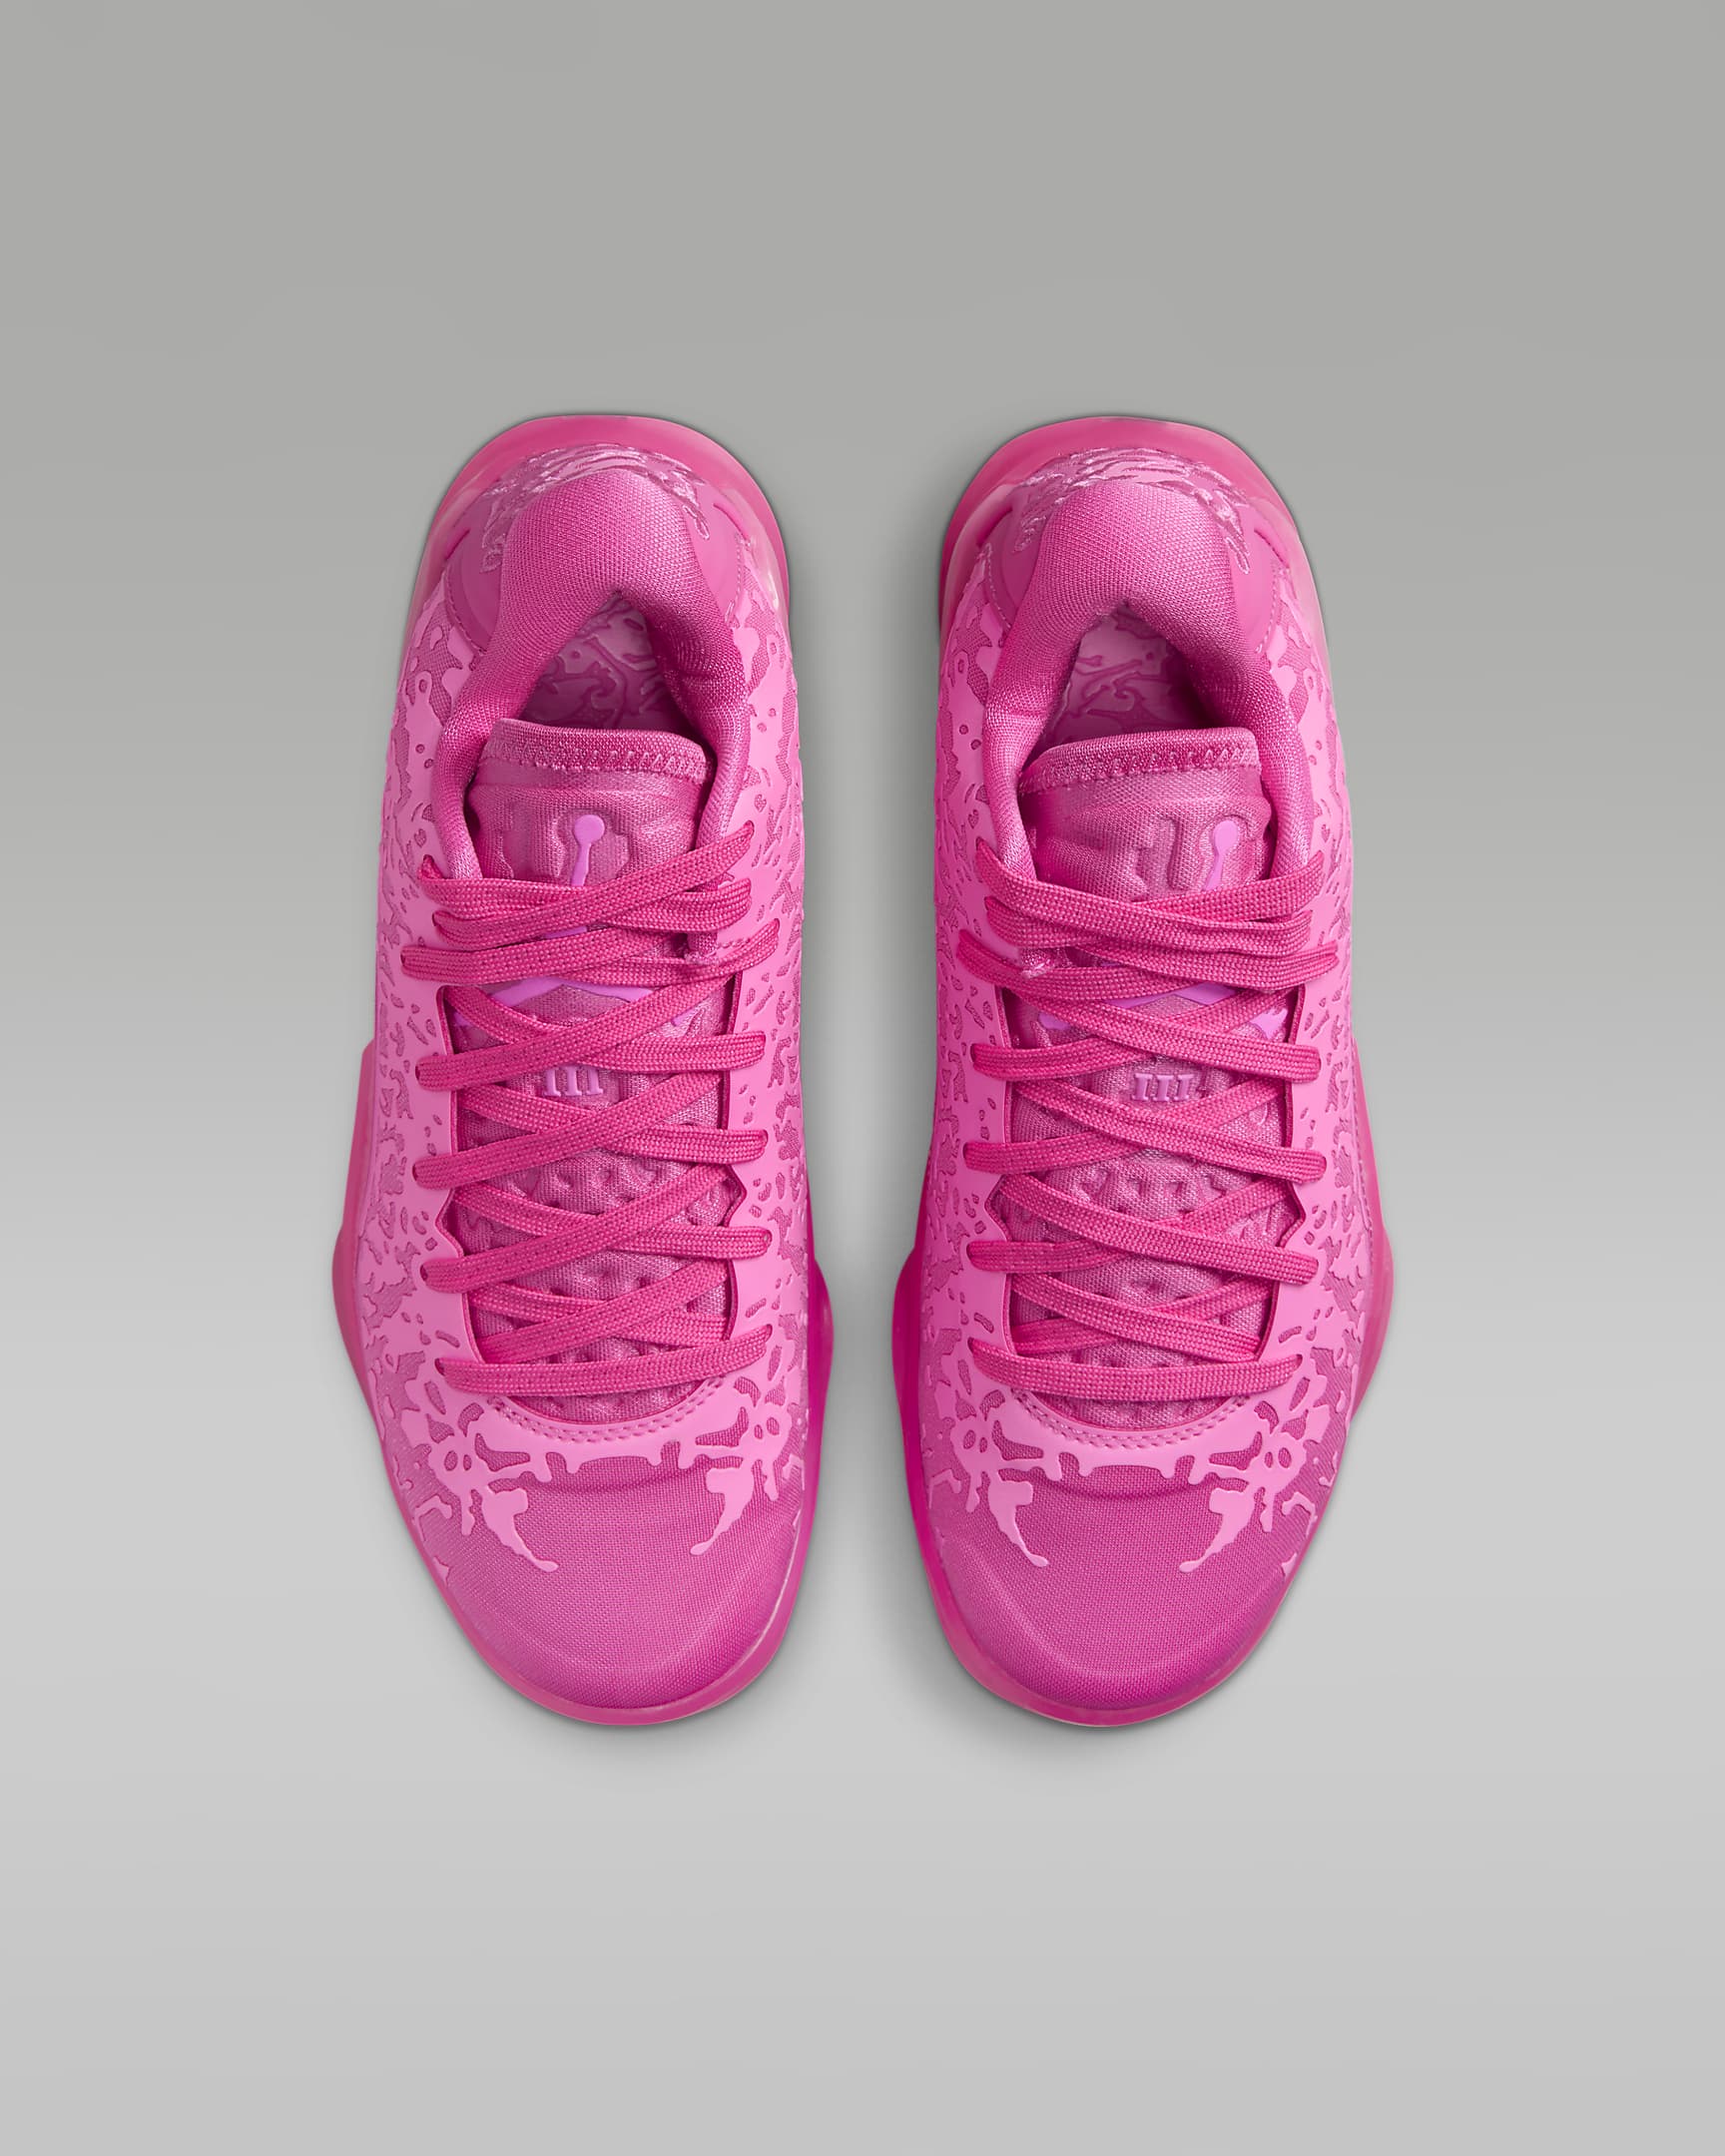 Chaussure de basket Zion 3 pour ado - Pinksicle/Pink Glow/Pink Spell